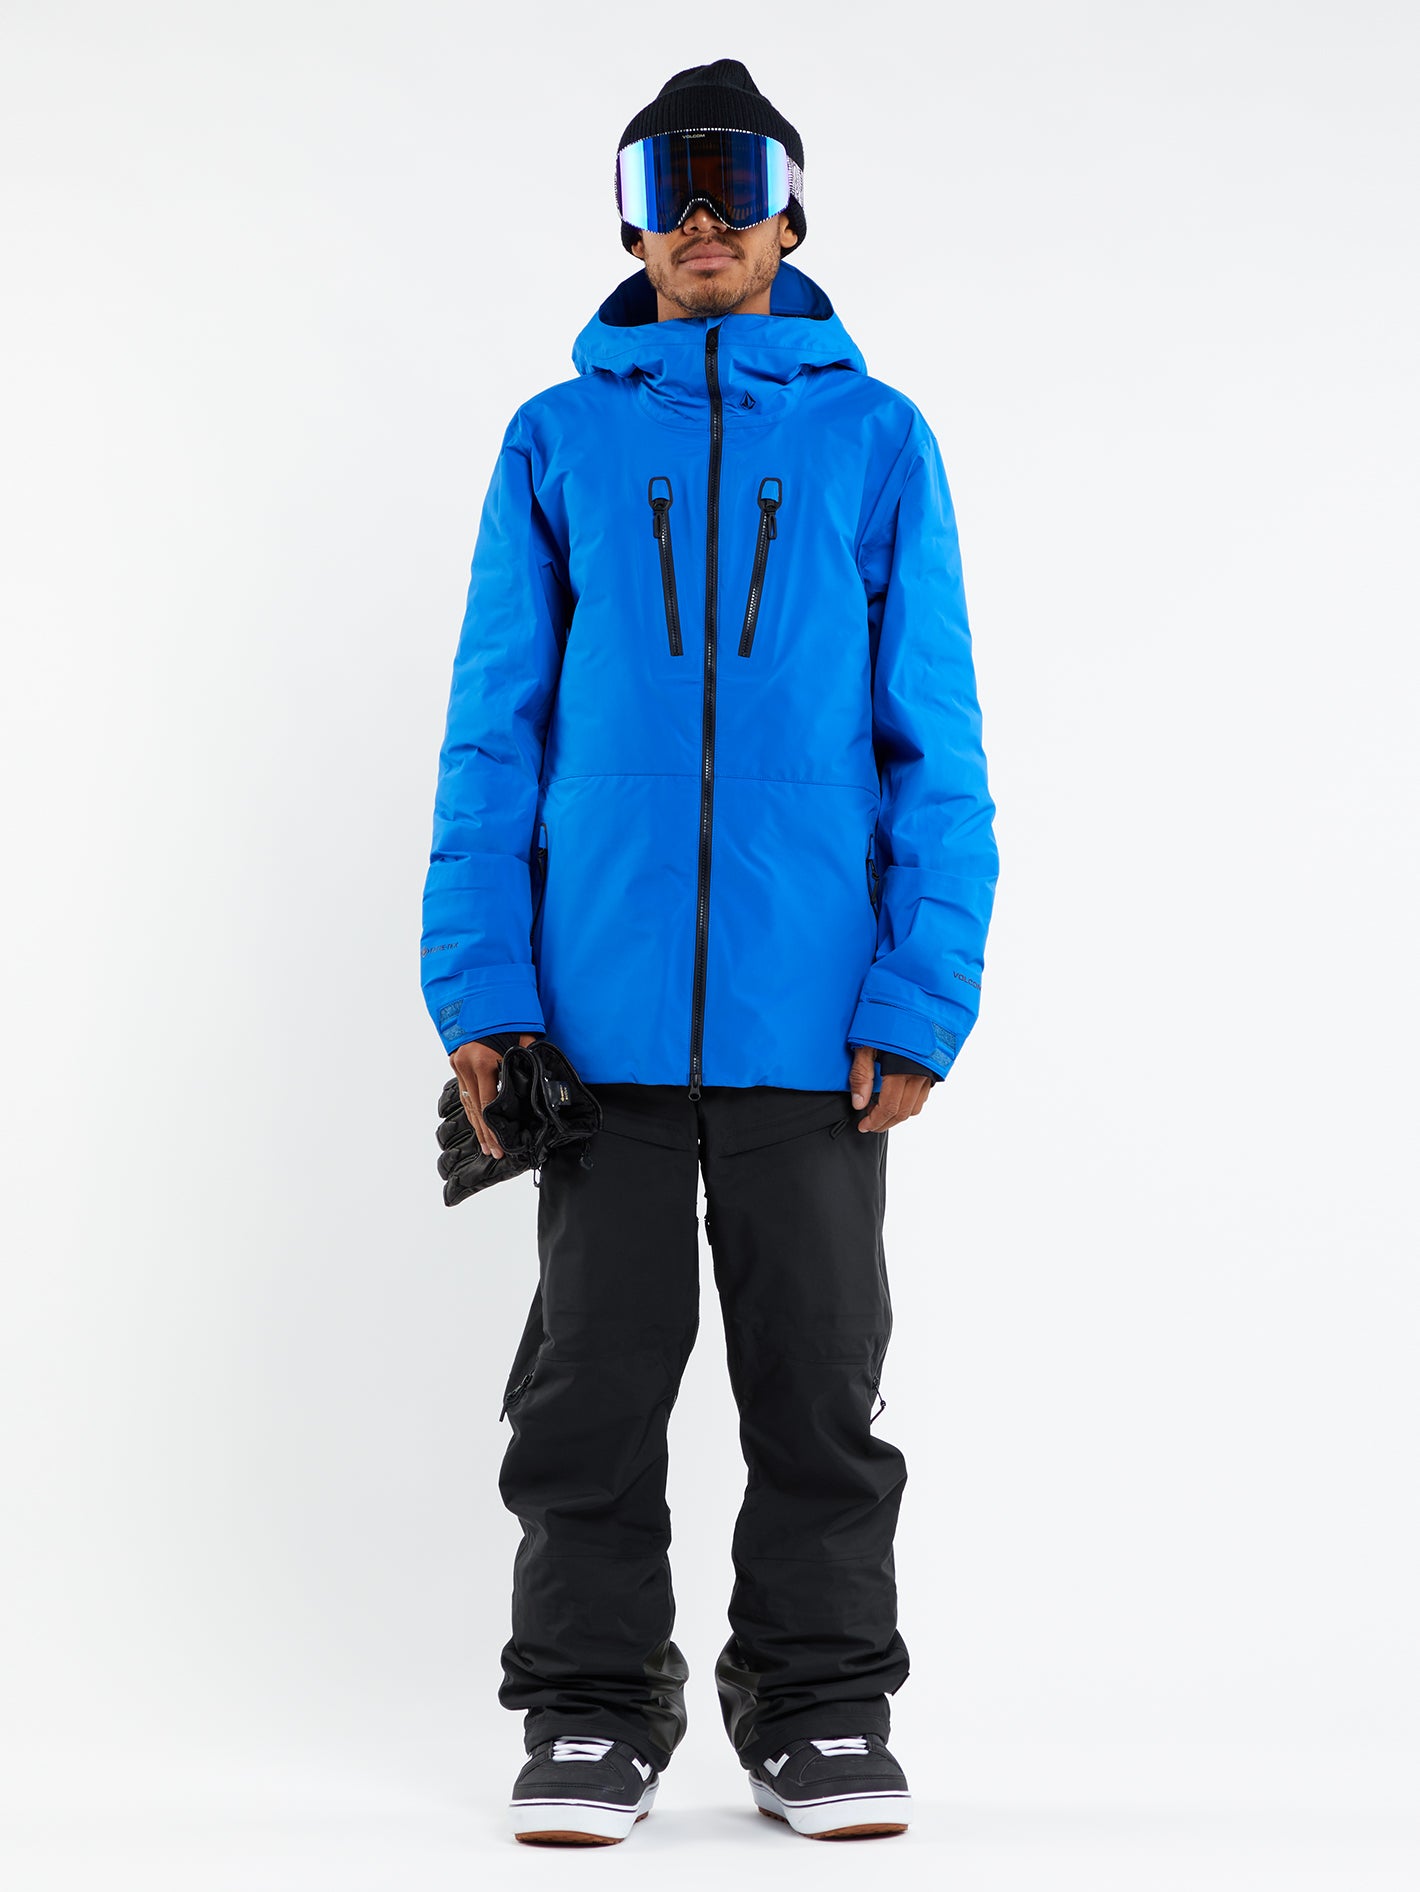 Mens Tds Infrared Gore-Tex Jacket - Electric Blue – Volcom US